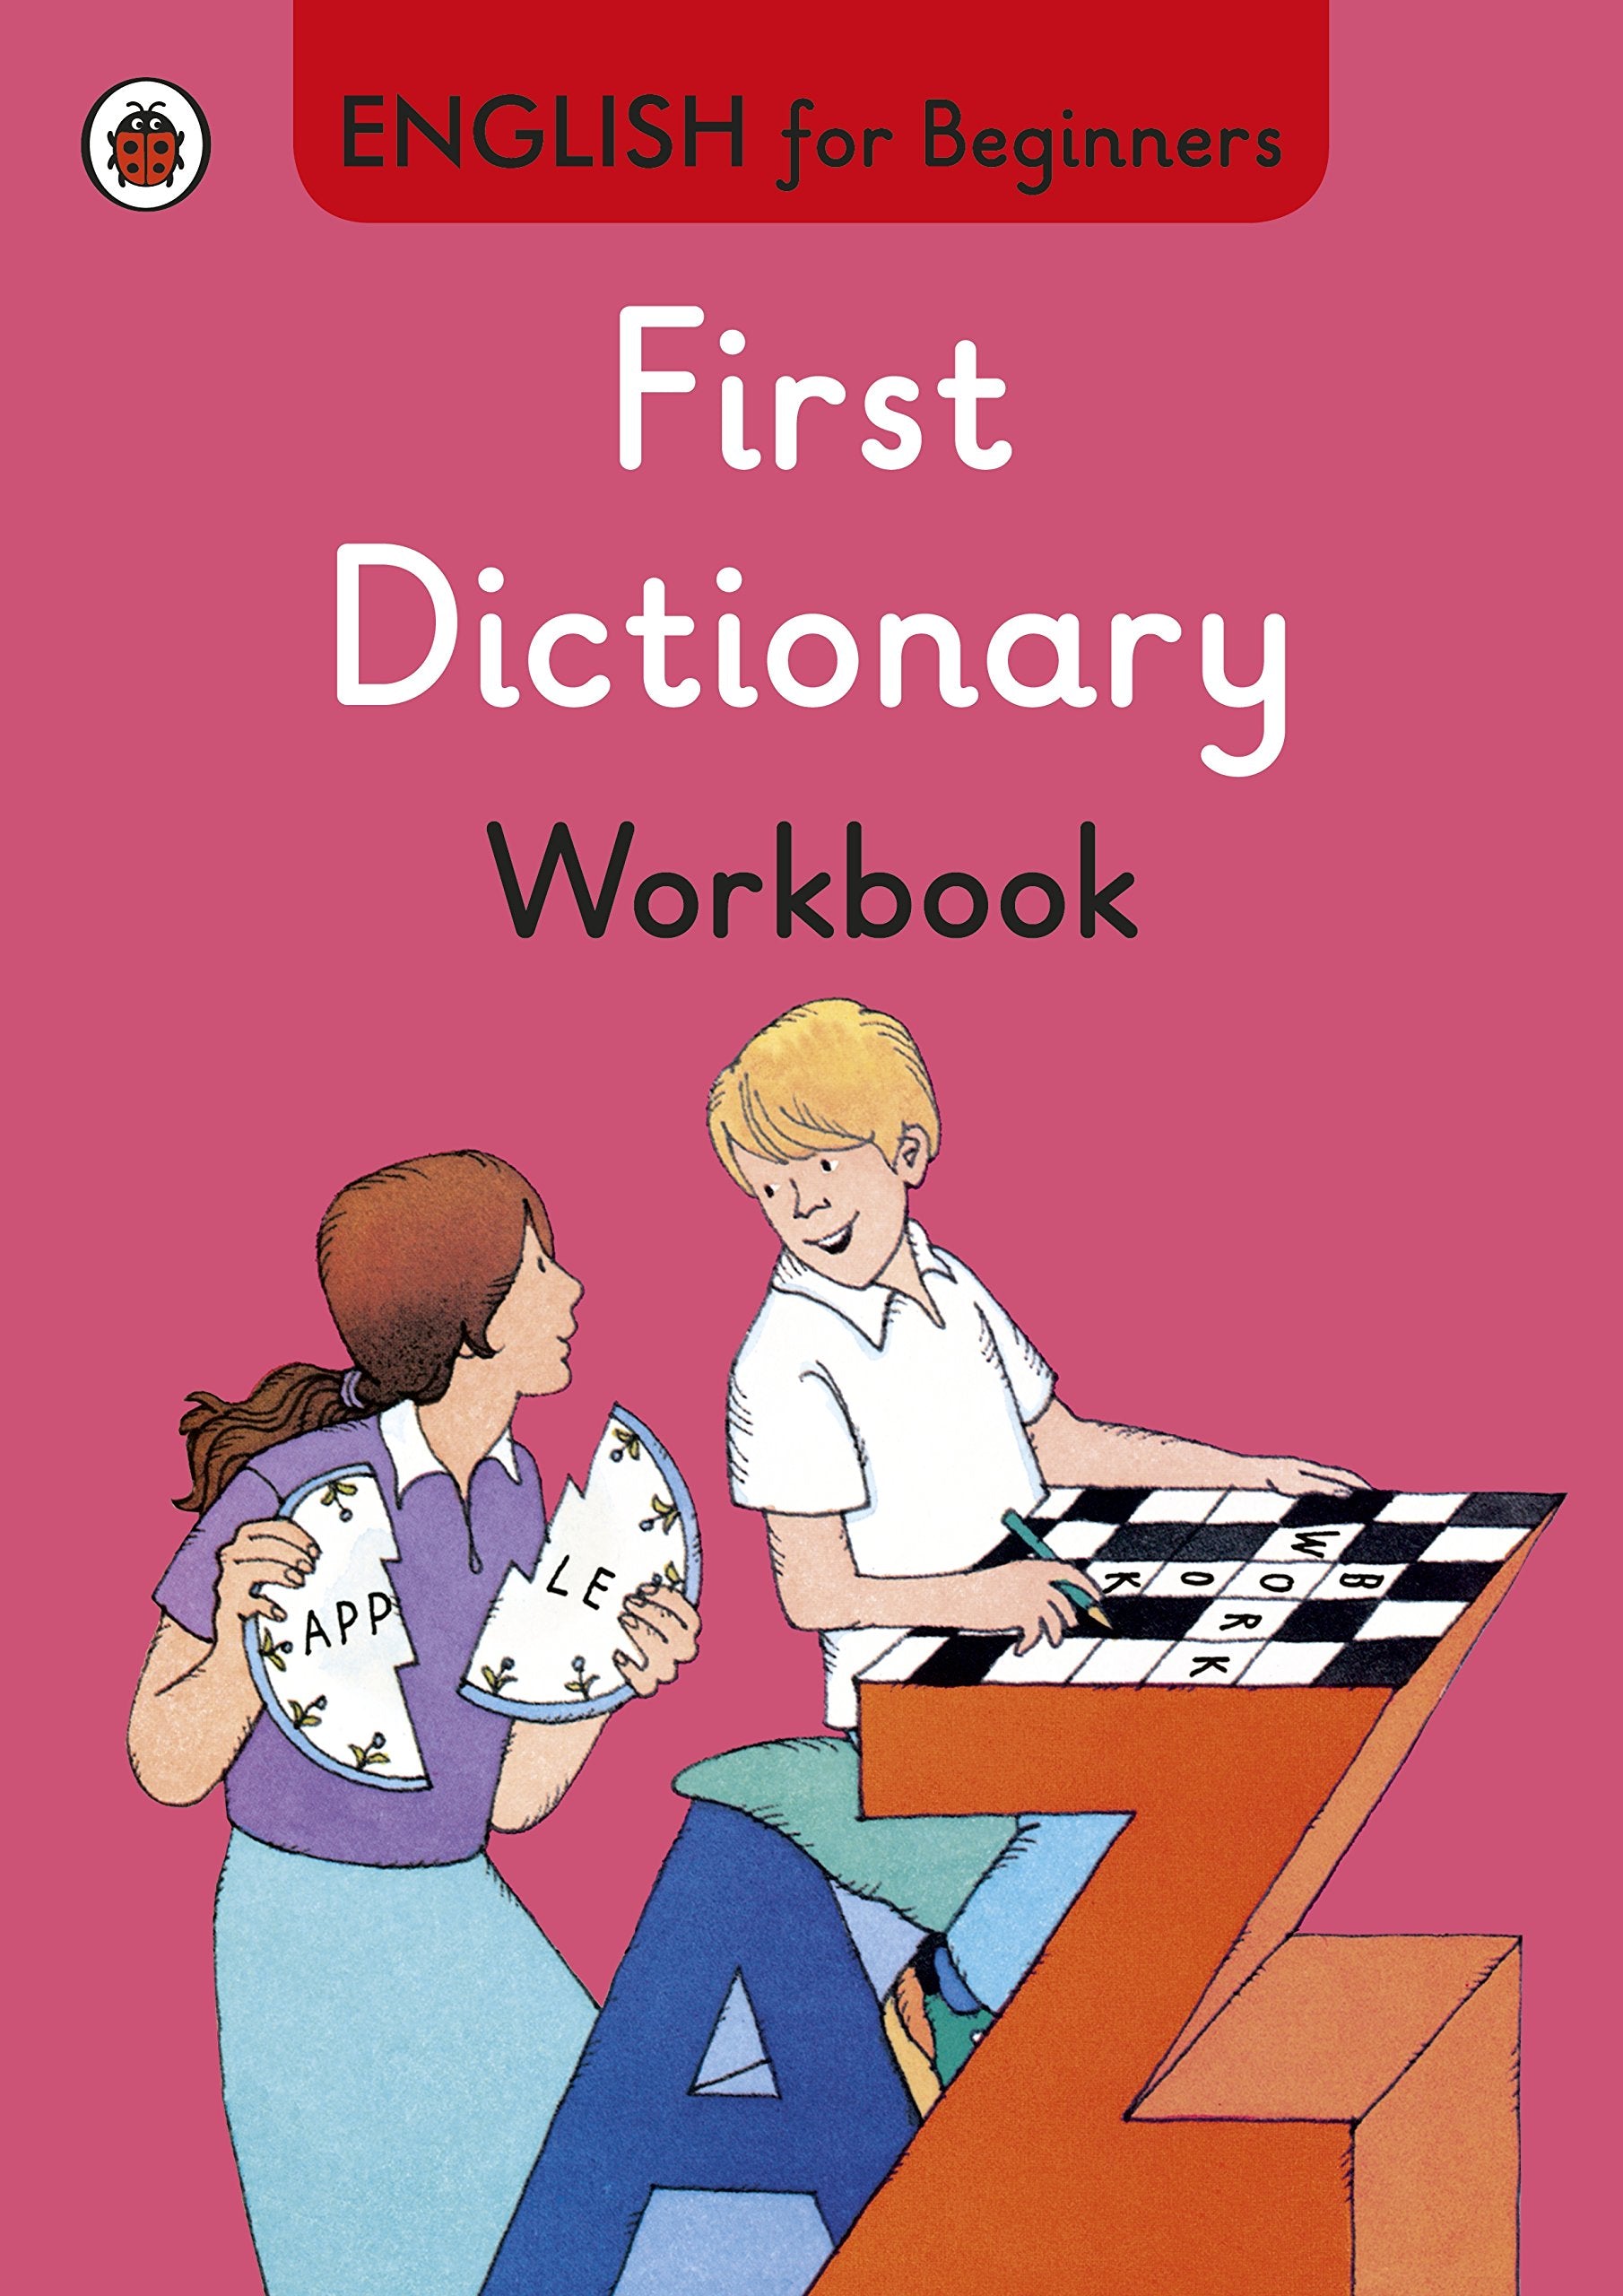 First Dictionary Workbook: English for Beginners